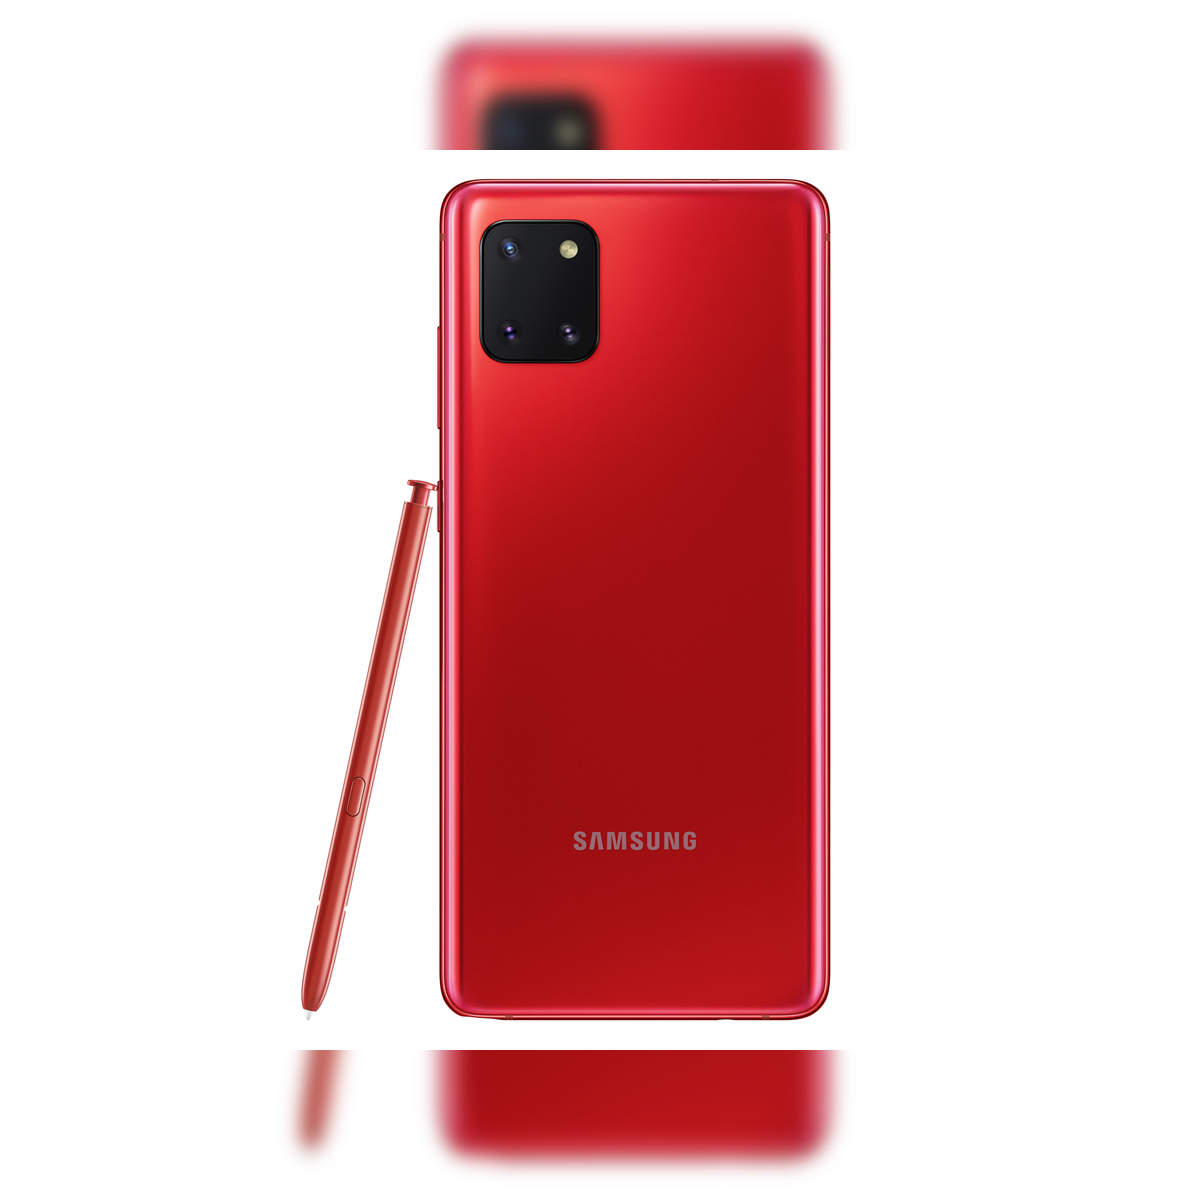 Samsung Galaxy Note 10 Lite Review